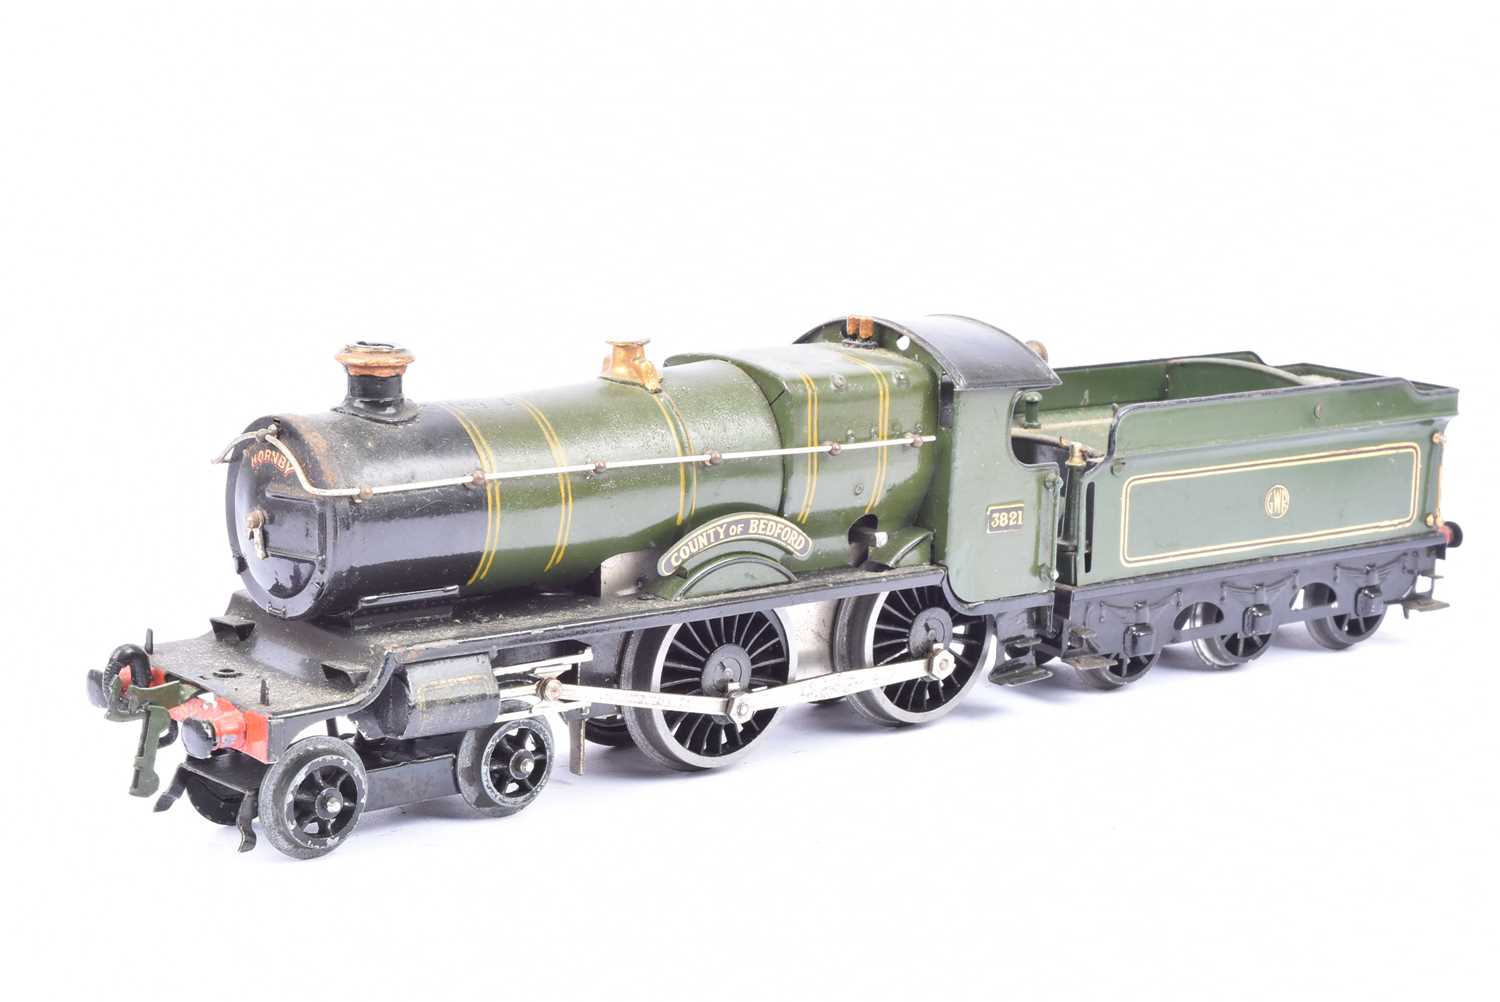 Lot 49 - Hornby 0 Gauge Clockwork GWR green No 2 Special 4-4-0 3821 'County of Bedford' Locomotive and No 2 Special Tender